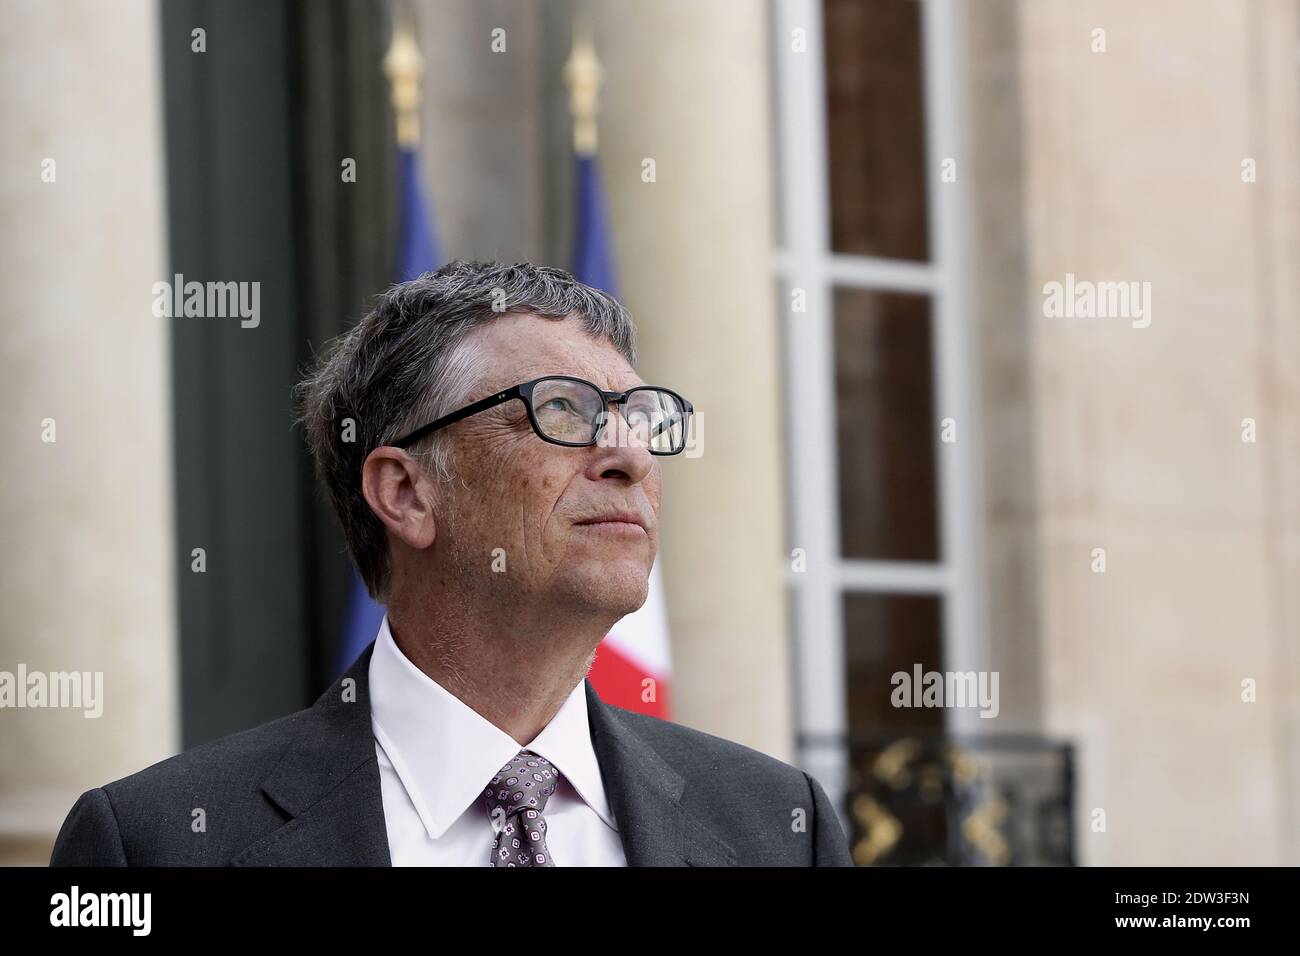 Bill Gates, the co-Founder of the Microsoft company and co-Founder of the Bill and Melinda Gates Fondation, answers to medias after his meeting with President Francois Hollande at the Elysee Presidential Palace, in Paris, France, on April 1, 2014. Photo by Stephane Lemouton/ABACAPRESS.COM Stock Photo